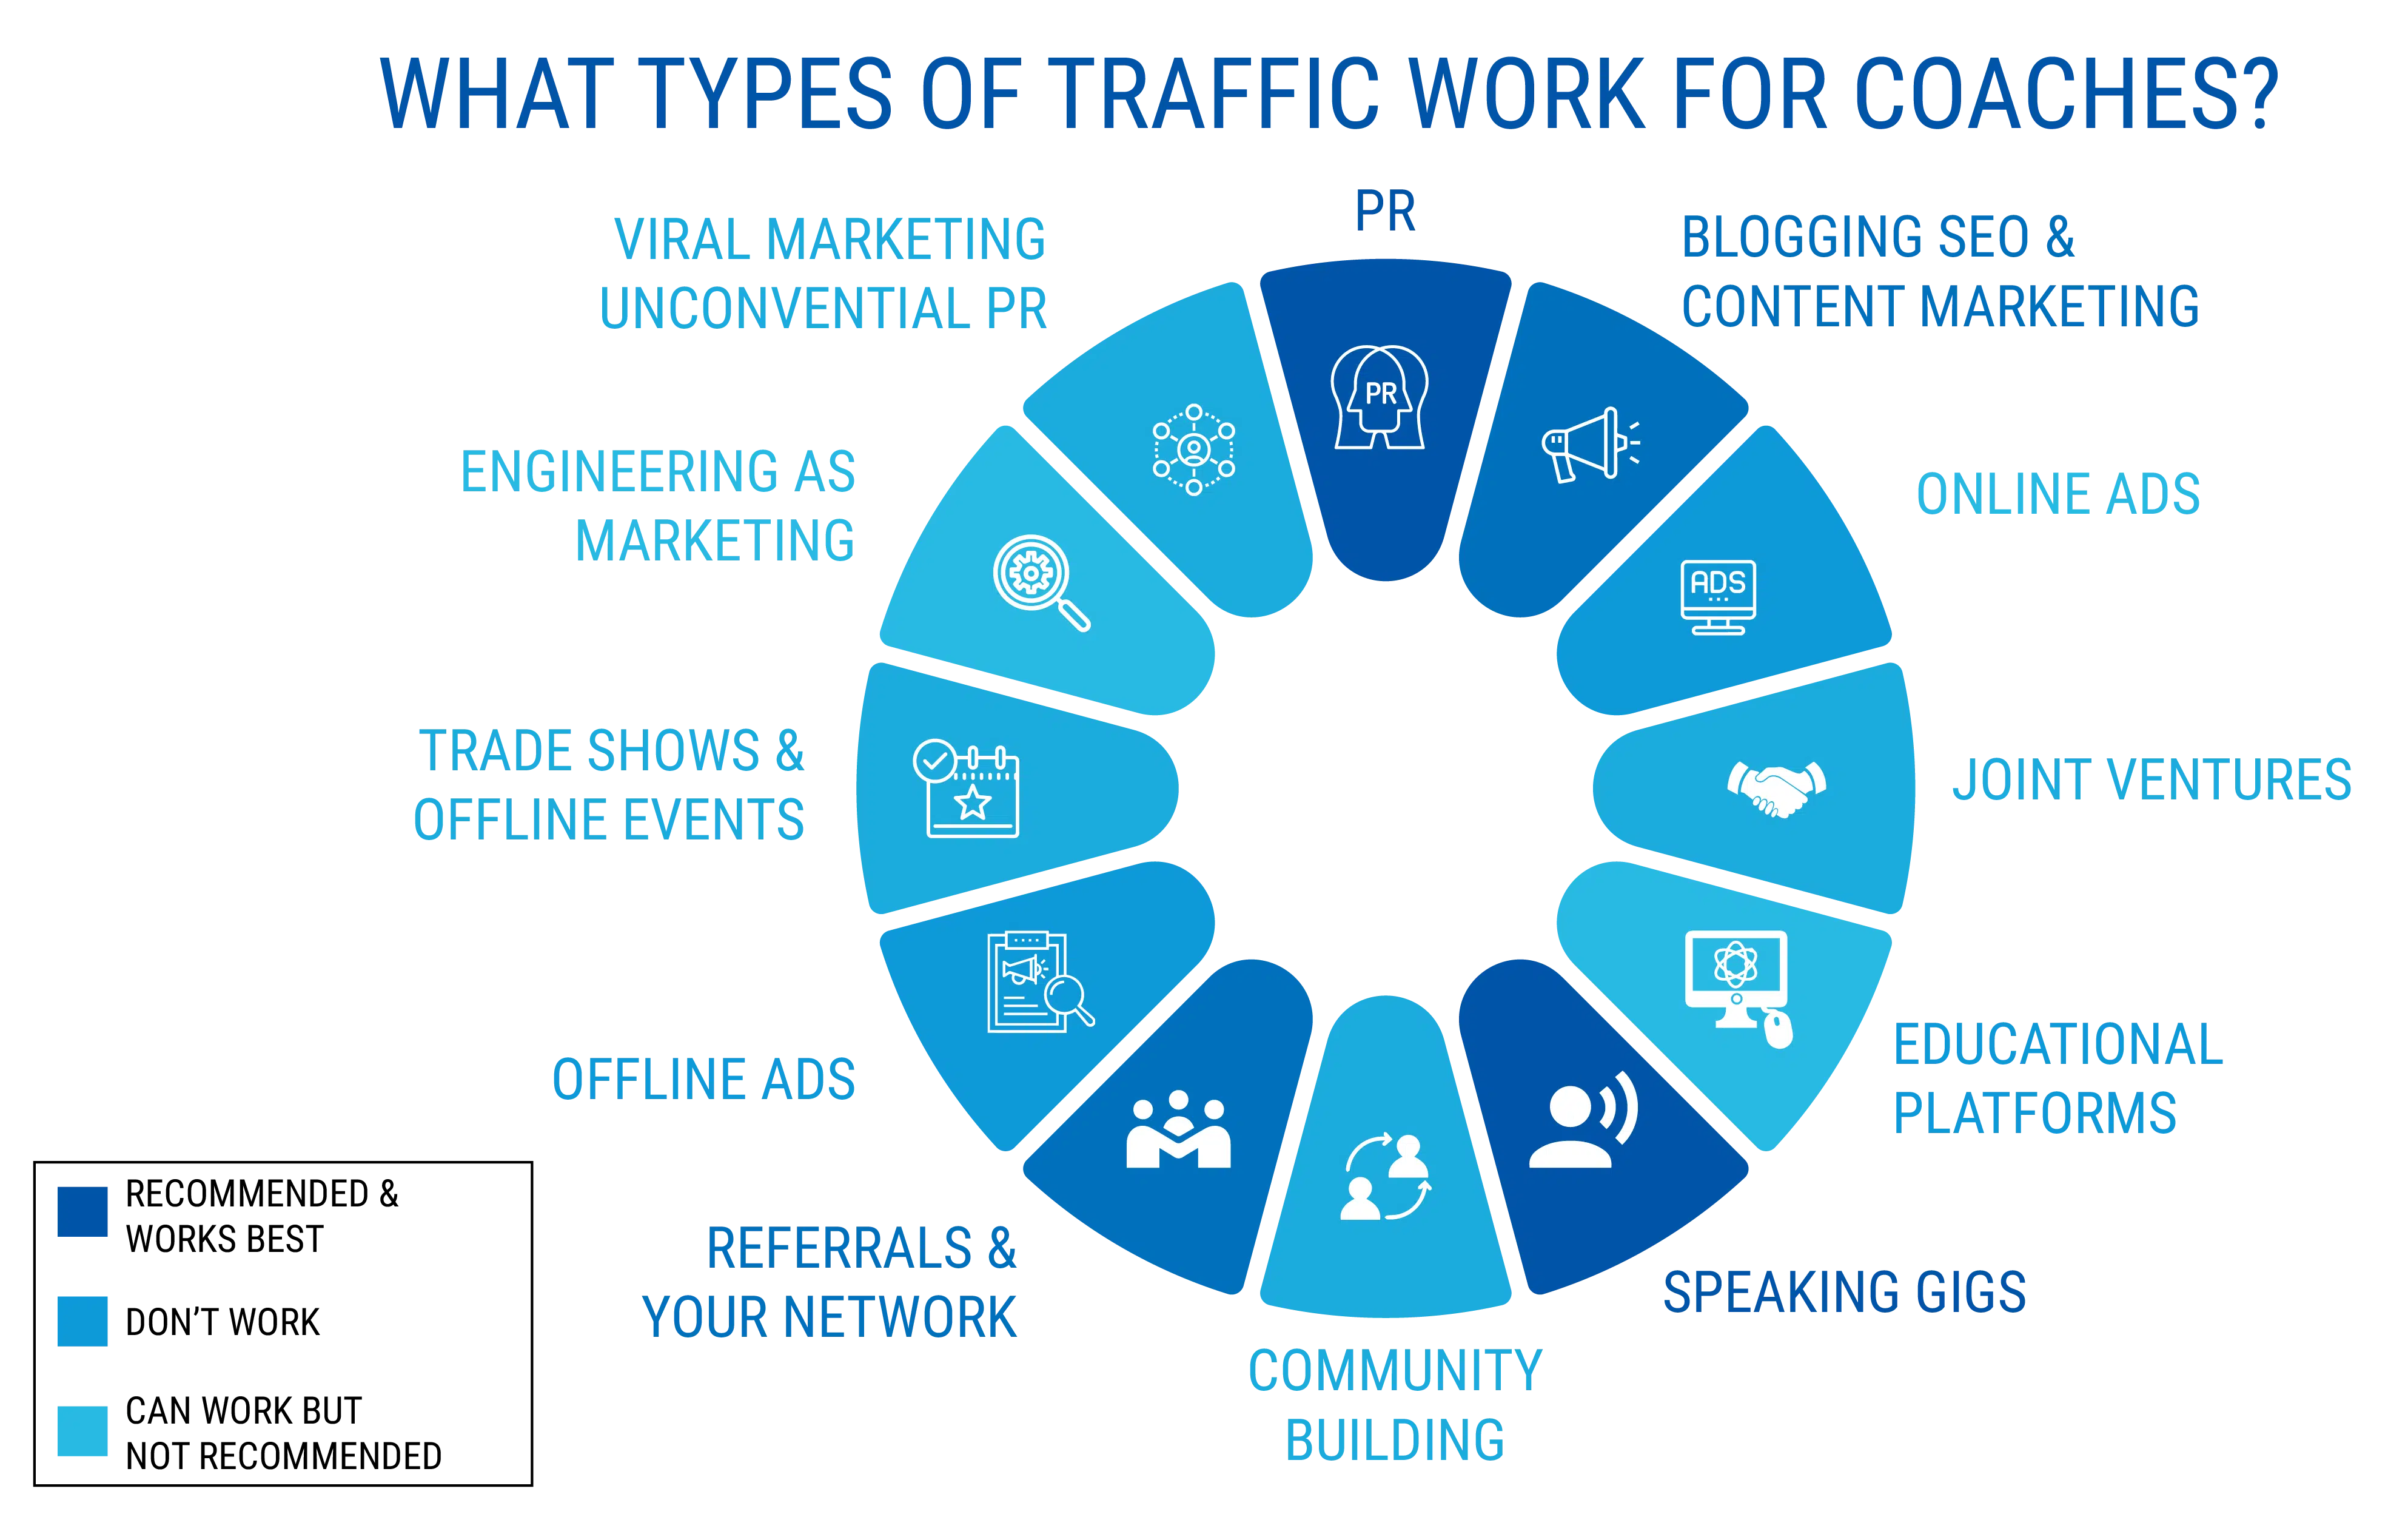 what type of traffic work for coaches - starting a coaching business while working full-time